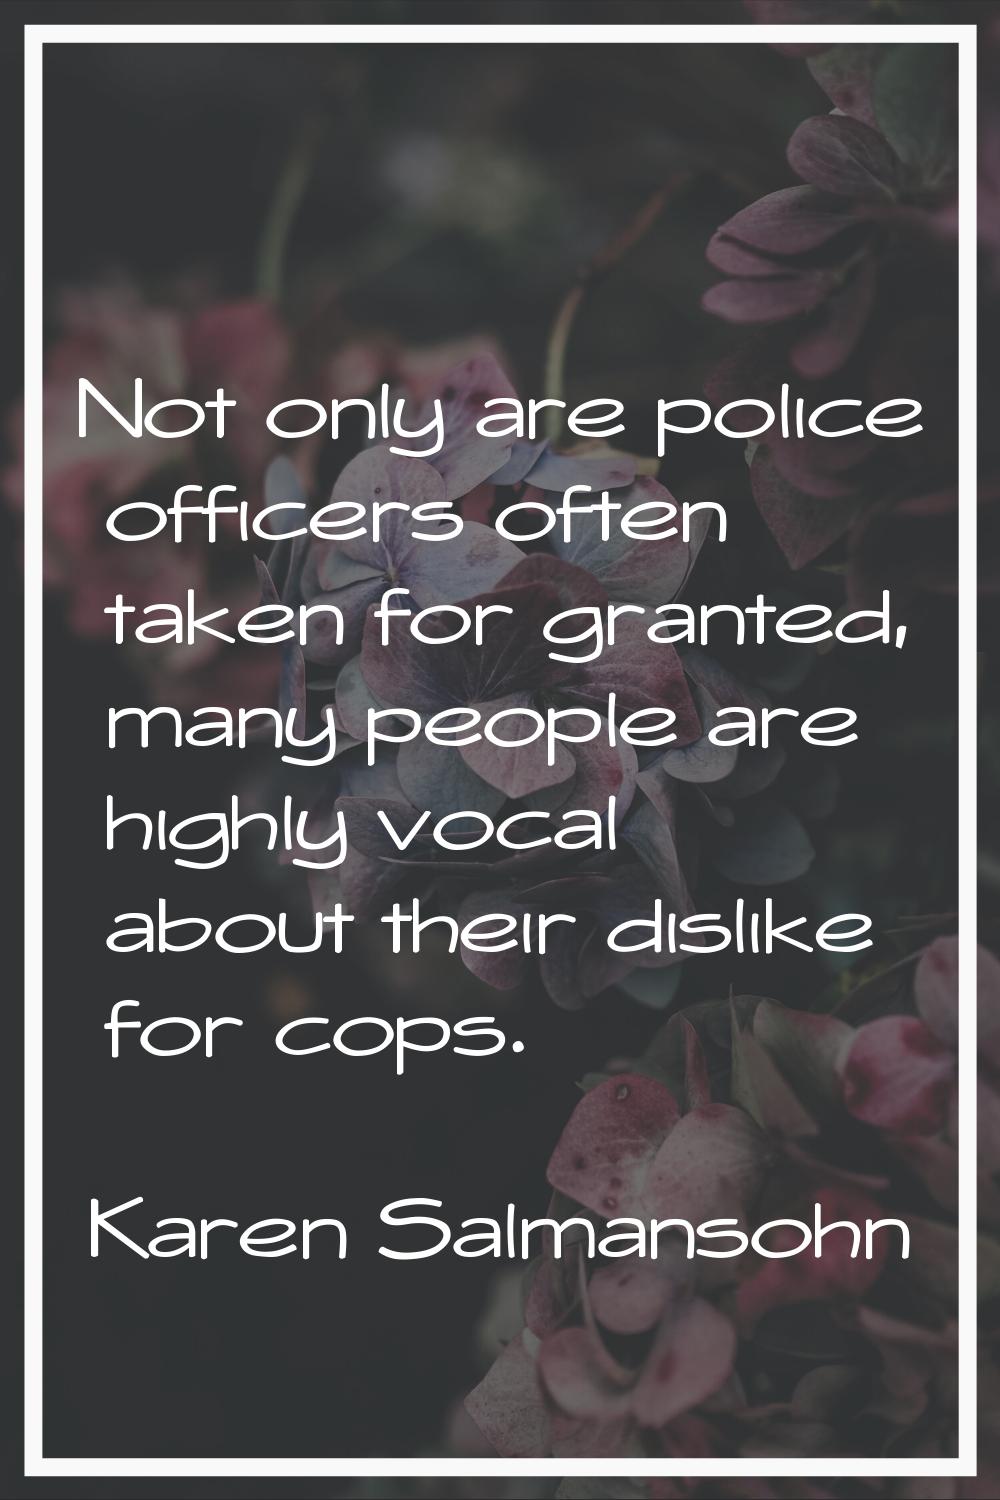 Not only are police officers often taken for granted, many people are highly vocal about their disl